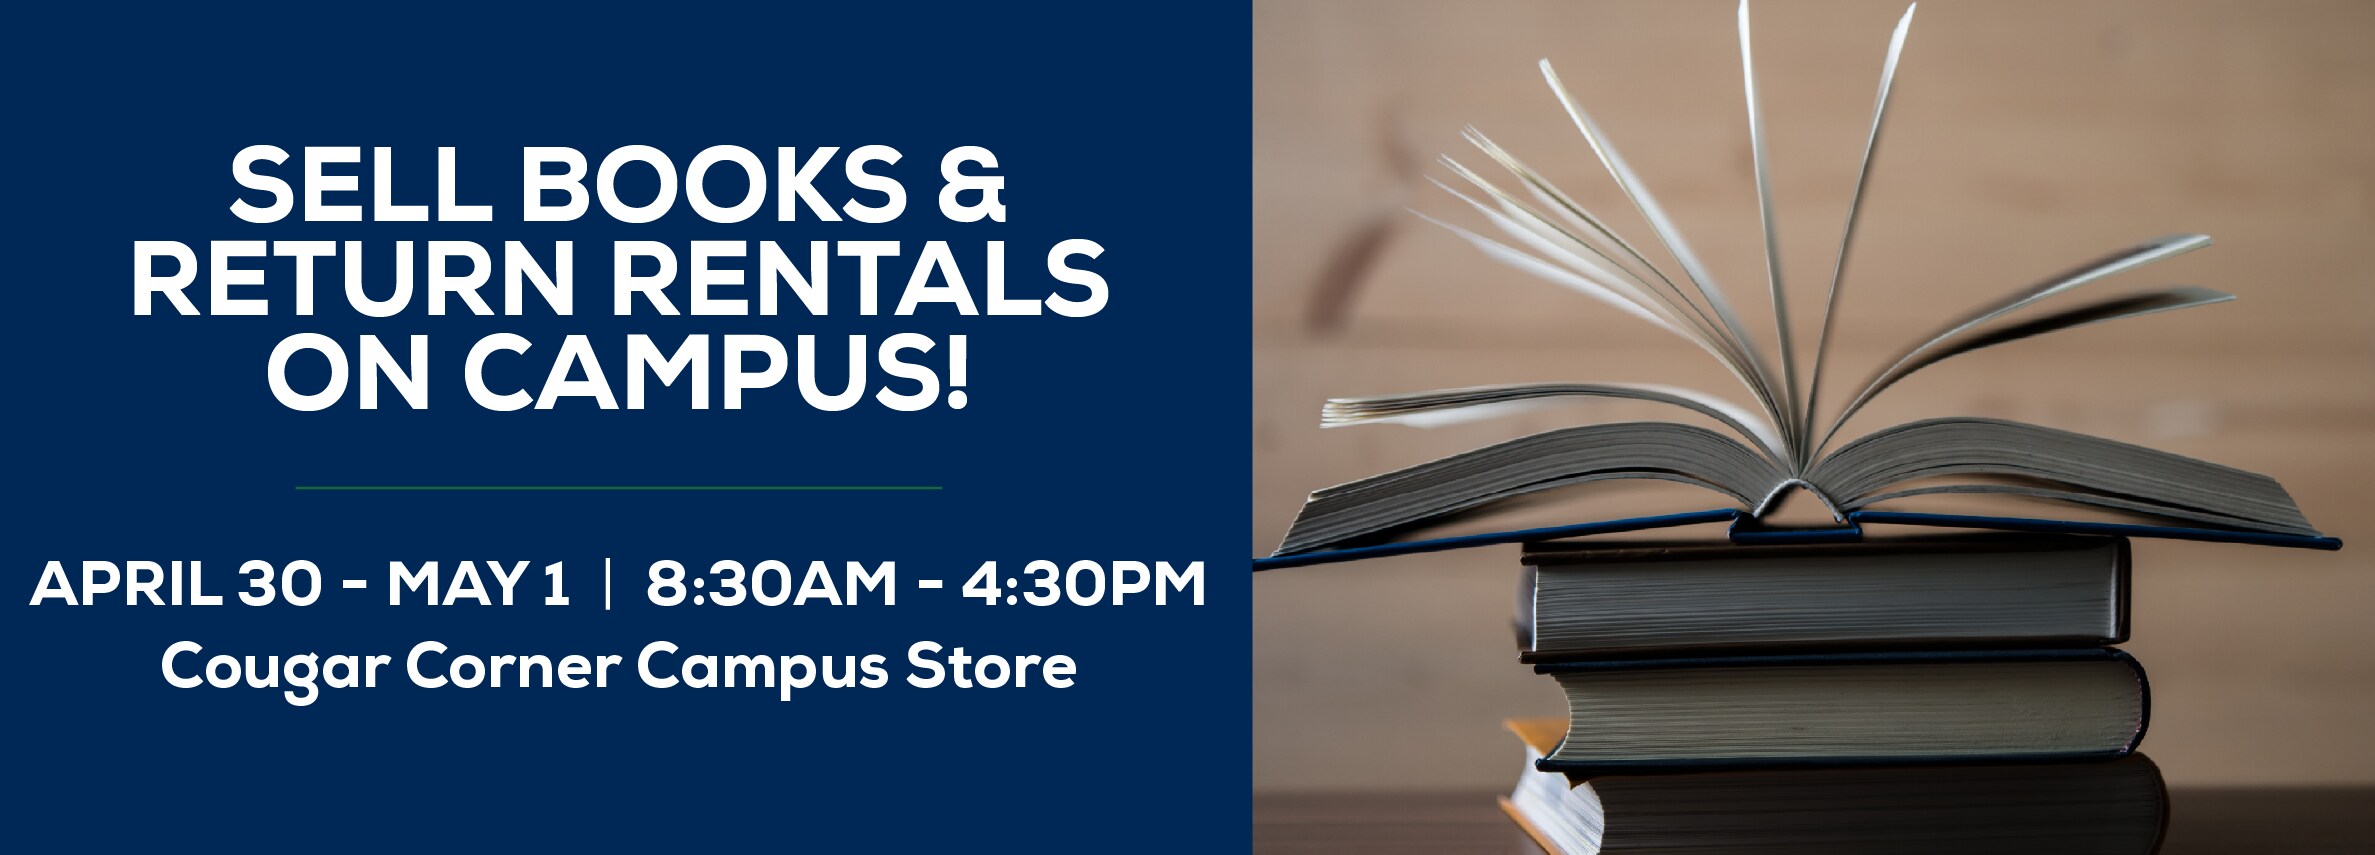 Sell books and return rentals on campus! April 30 - May 1. 8:30am to 4:30pm. Cougar Corner Campus Store